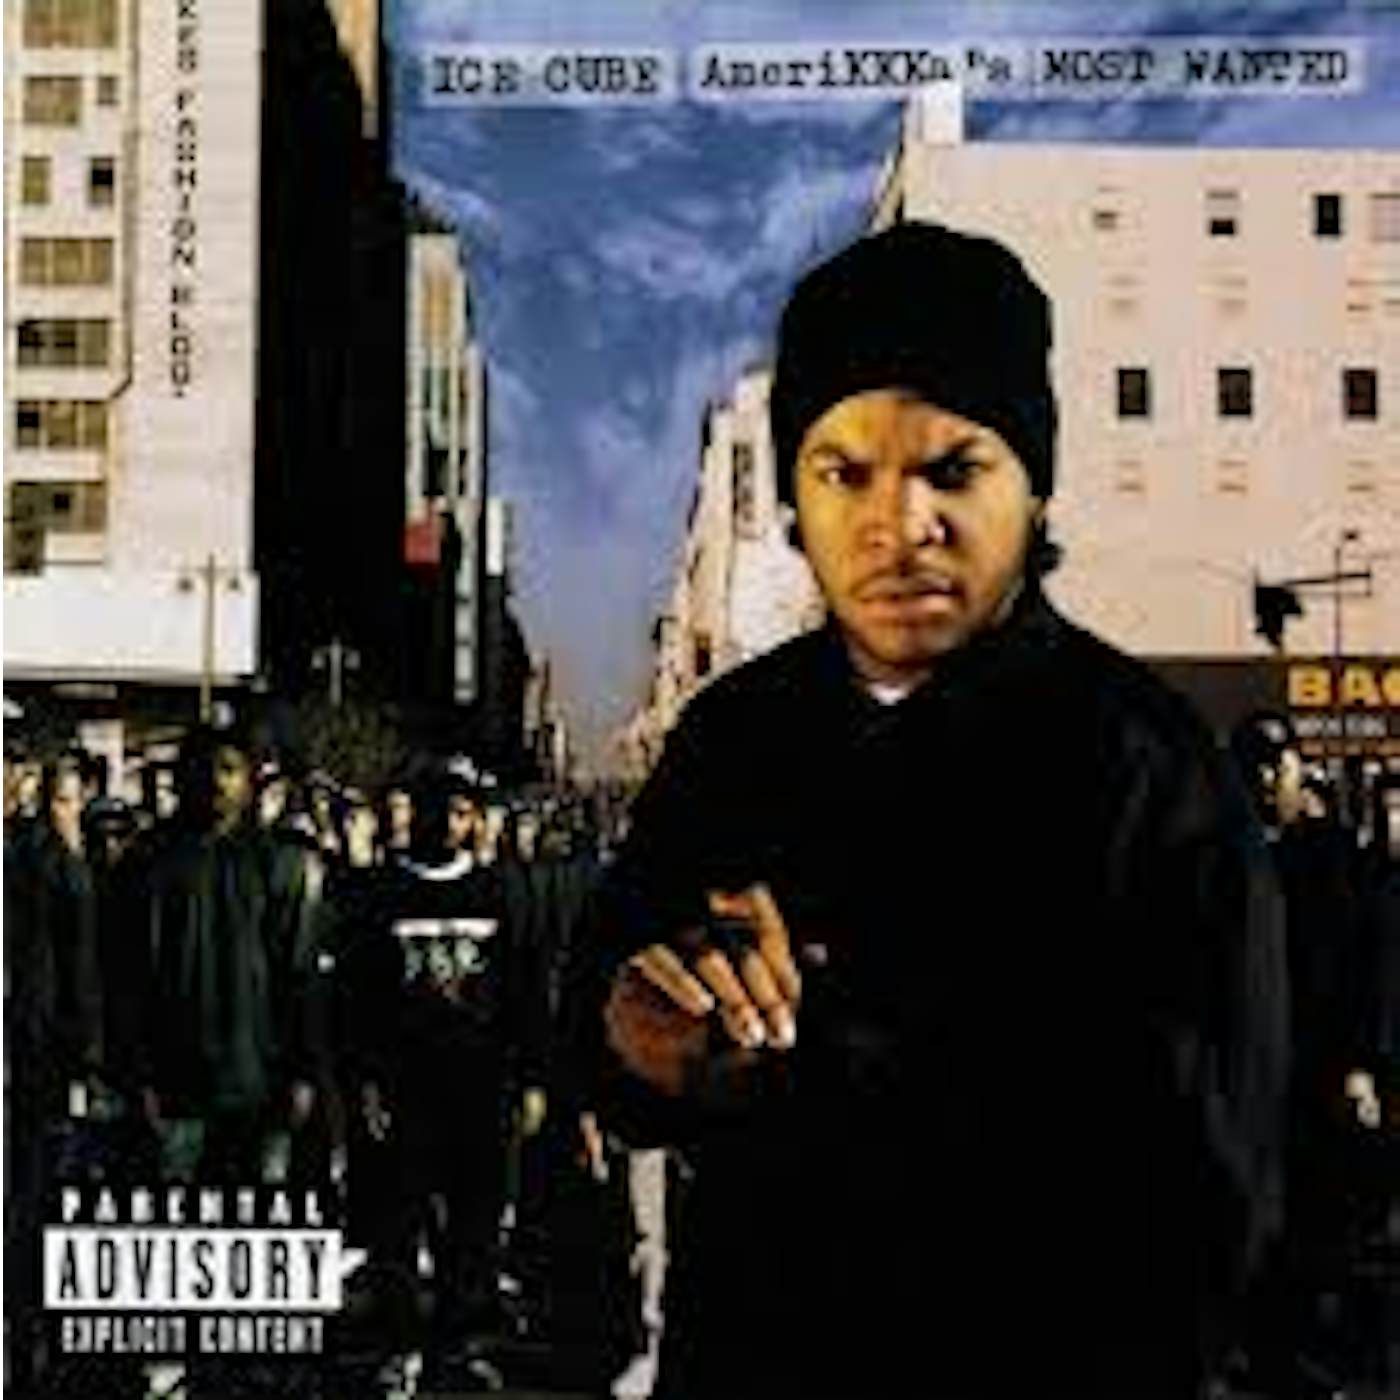 Ice Cube AMERIKKKA'S MOST WANTED CD